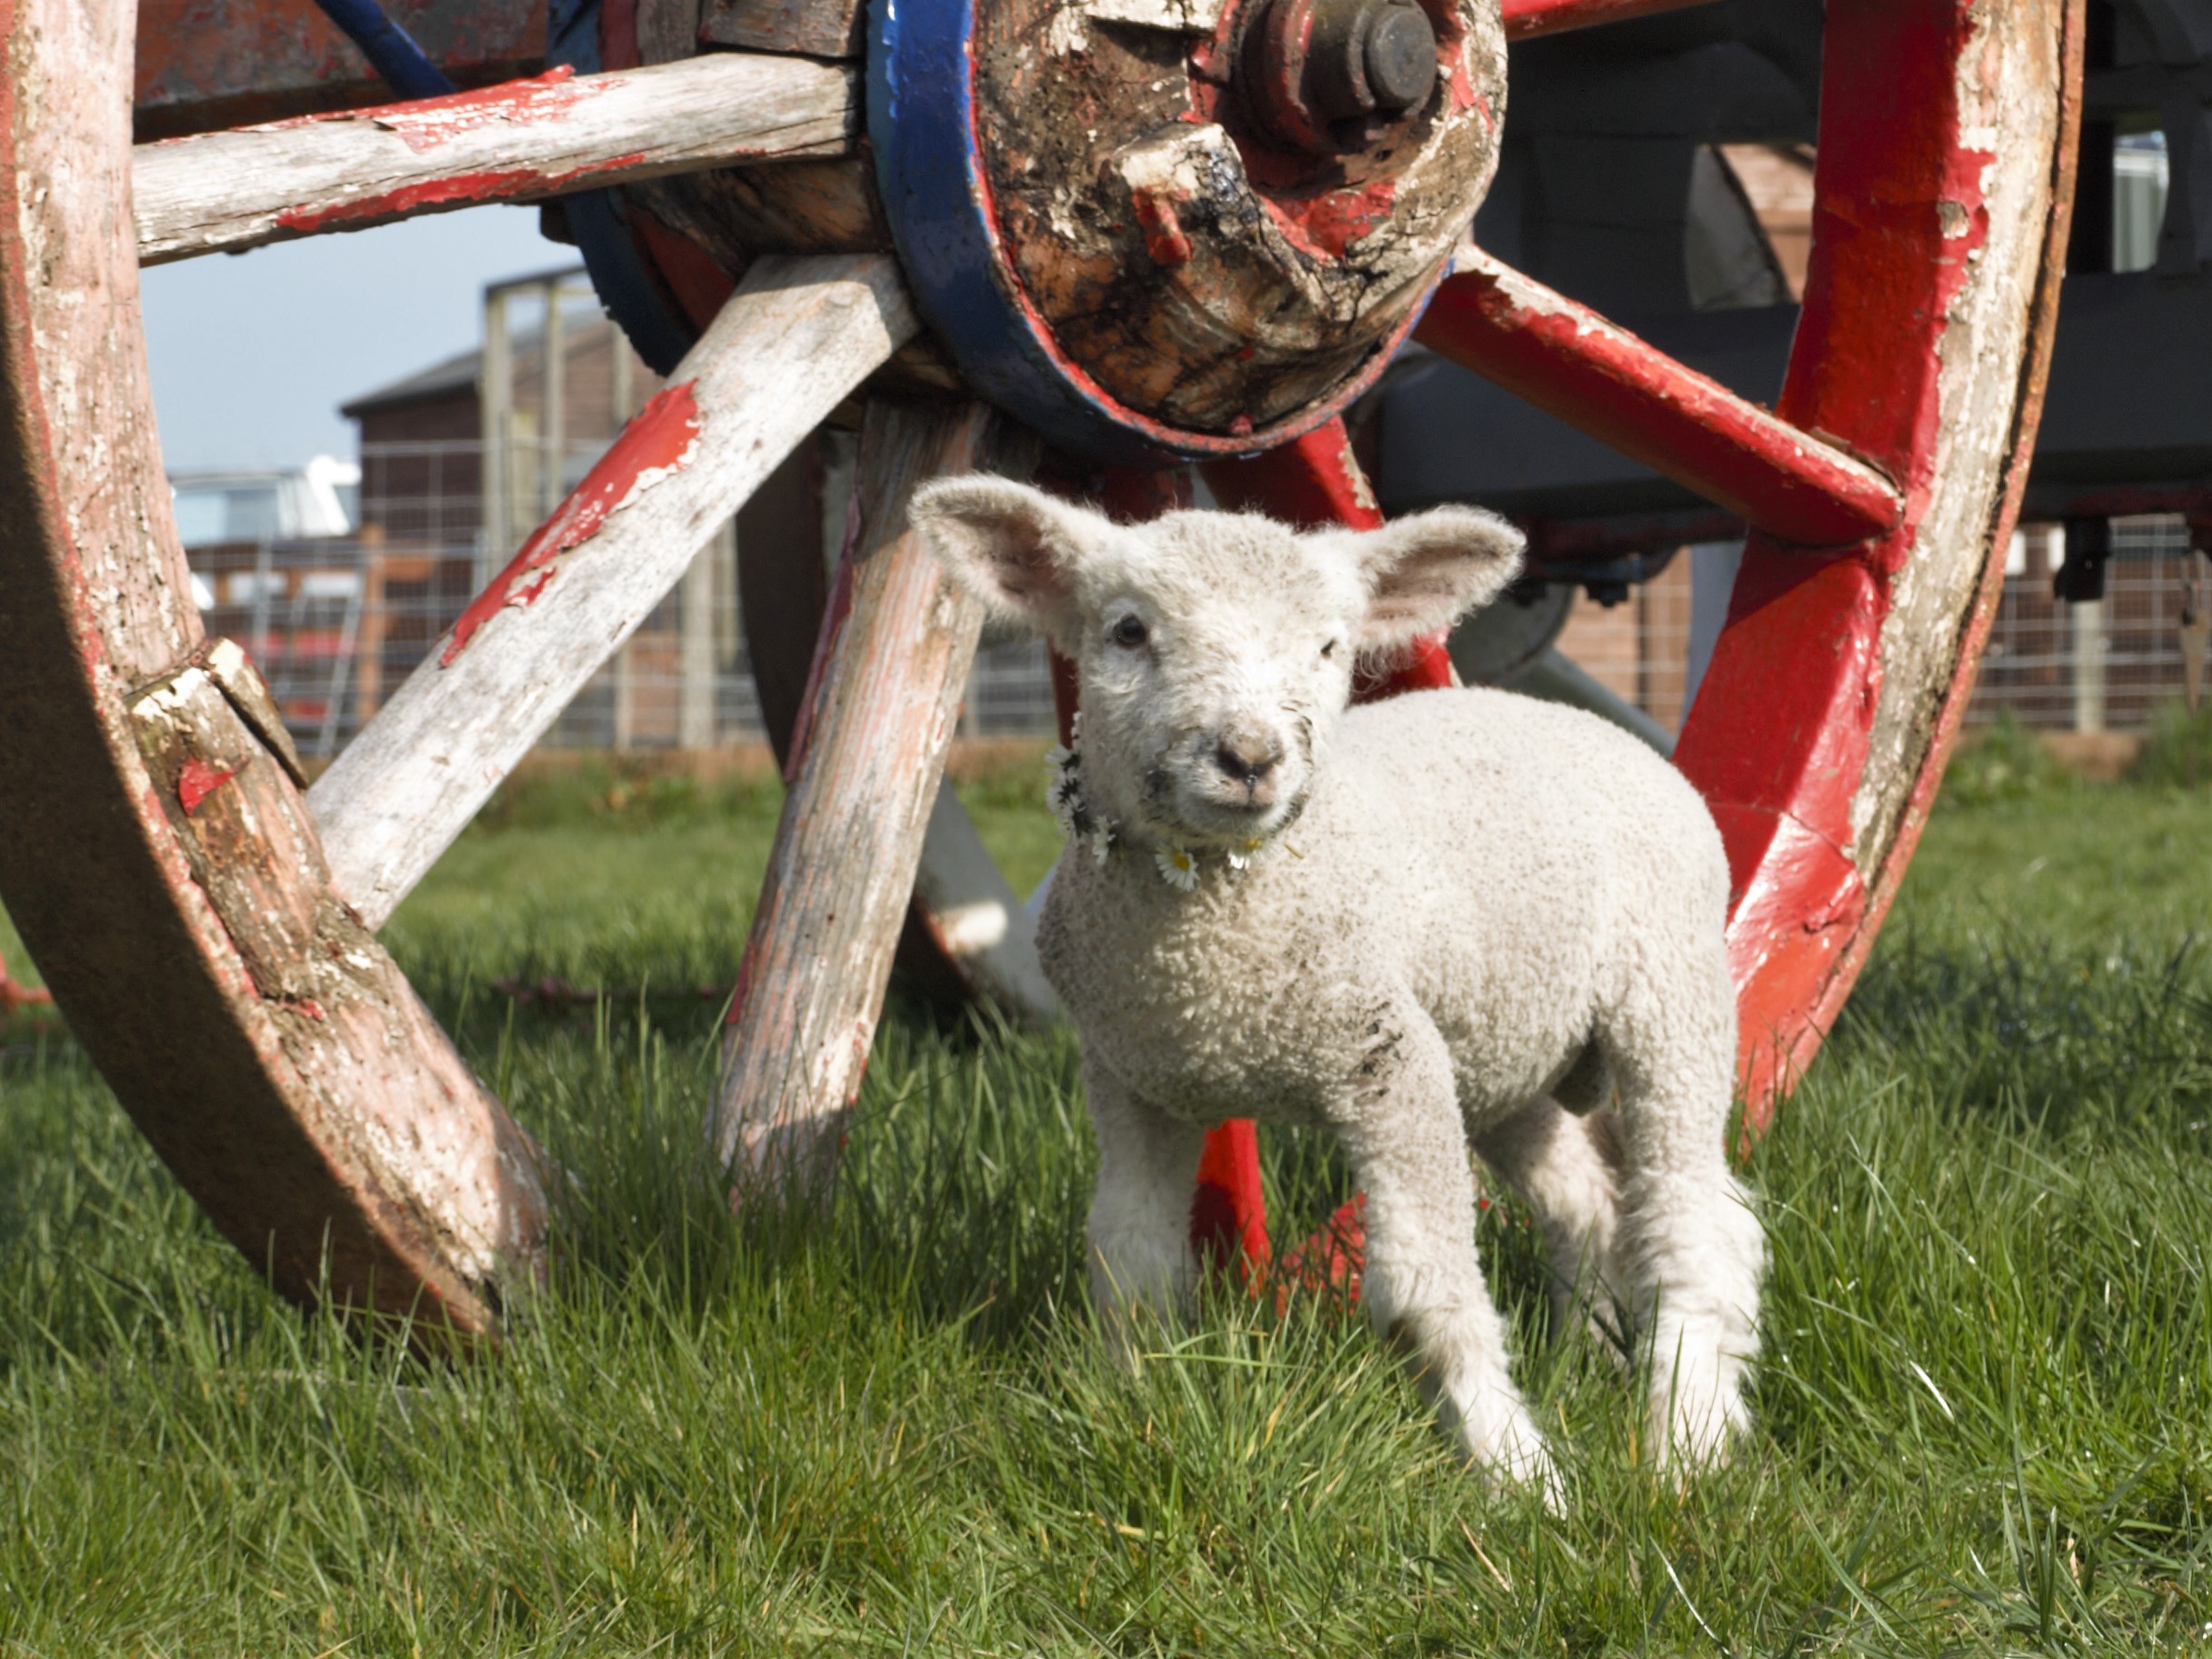 A lamb in front of a wheel